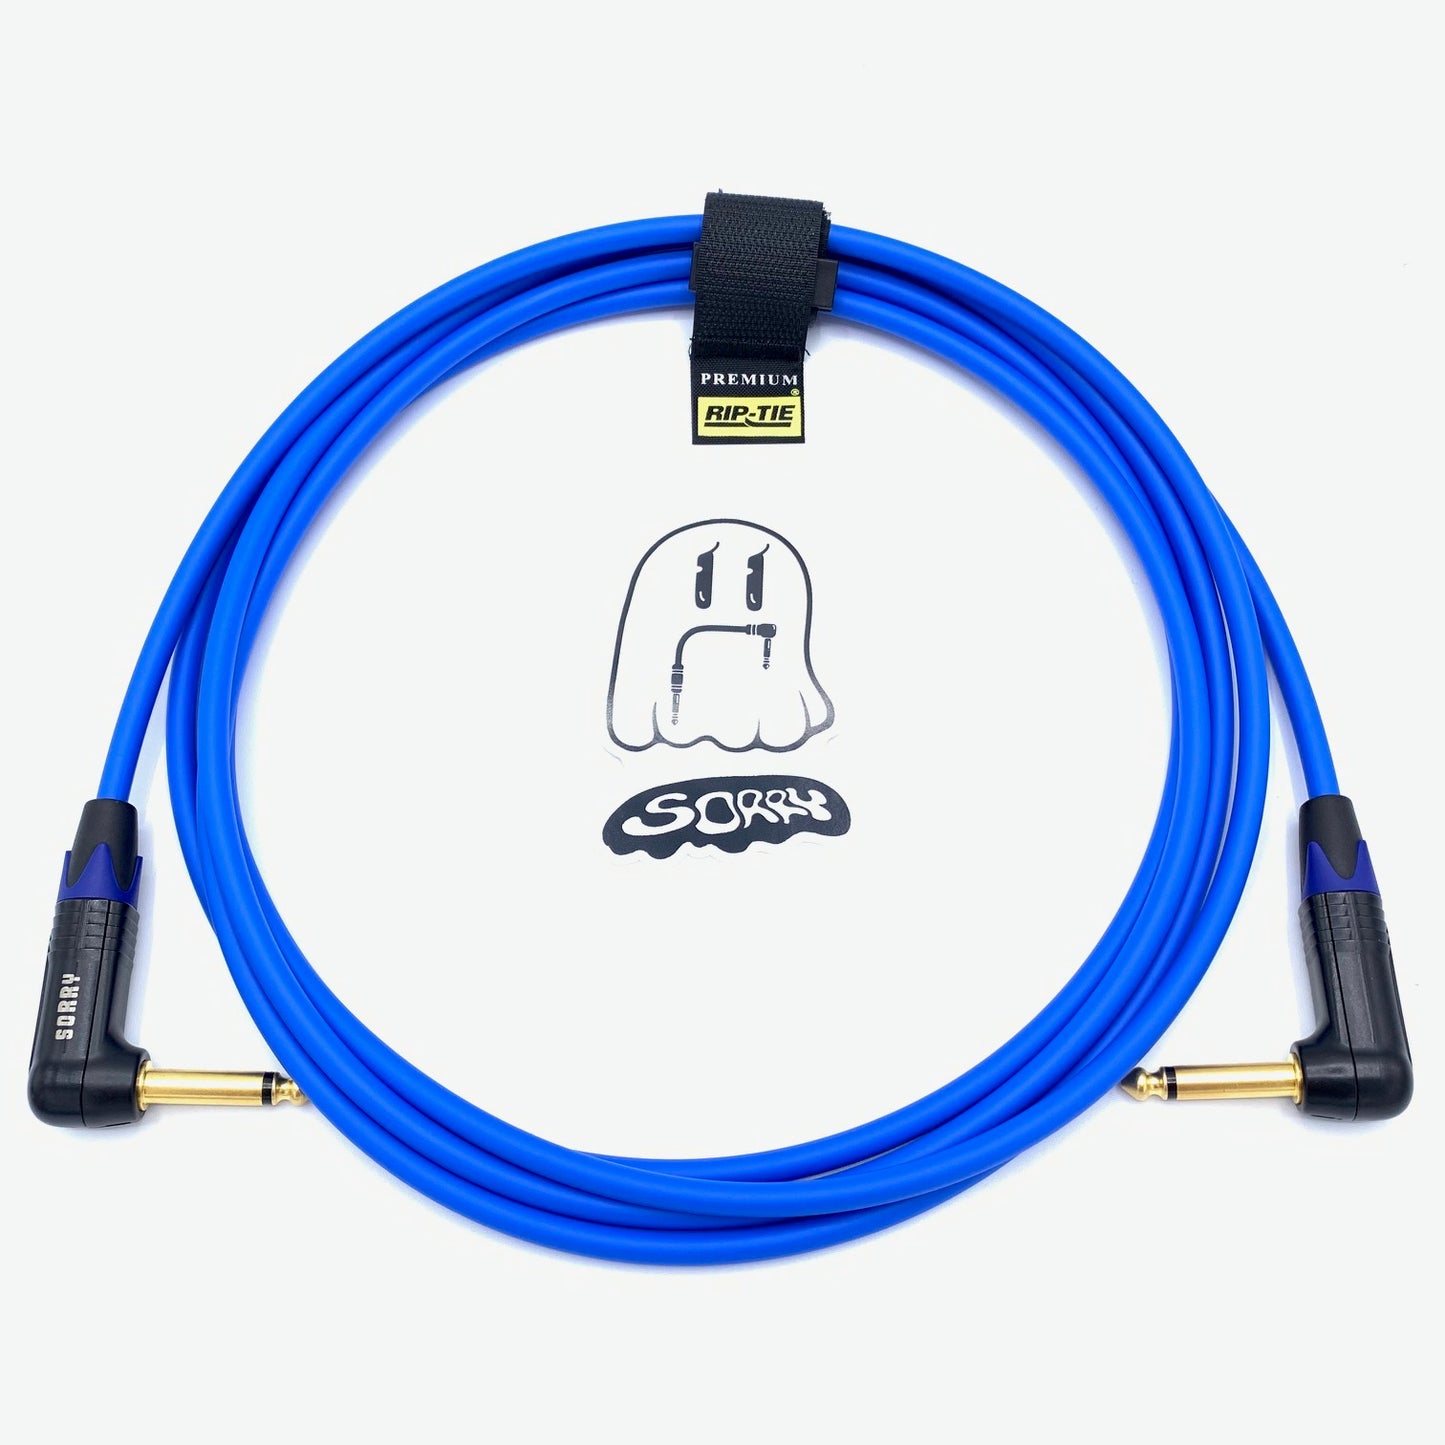 SORRY Right Angle to Right Angle Guitar / Instrument Cable - Standard Blue